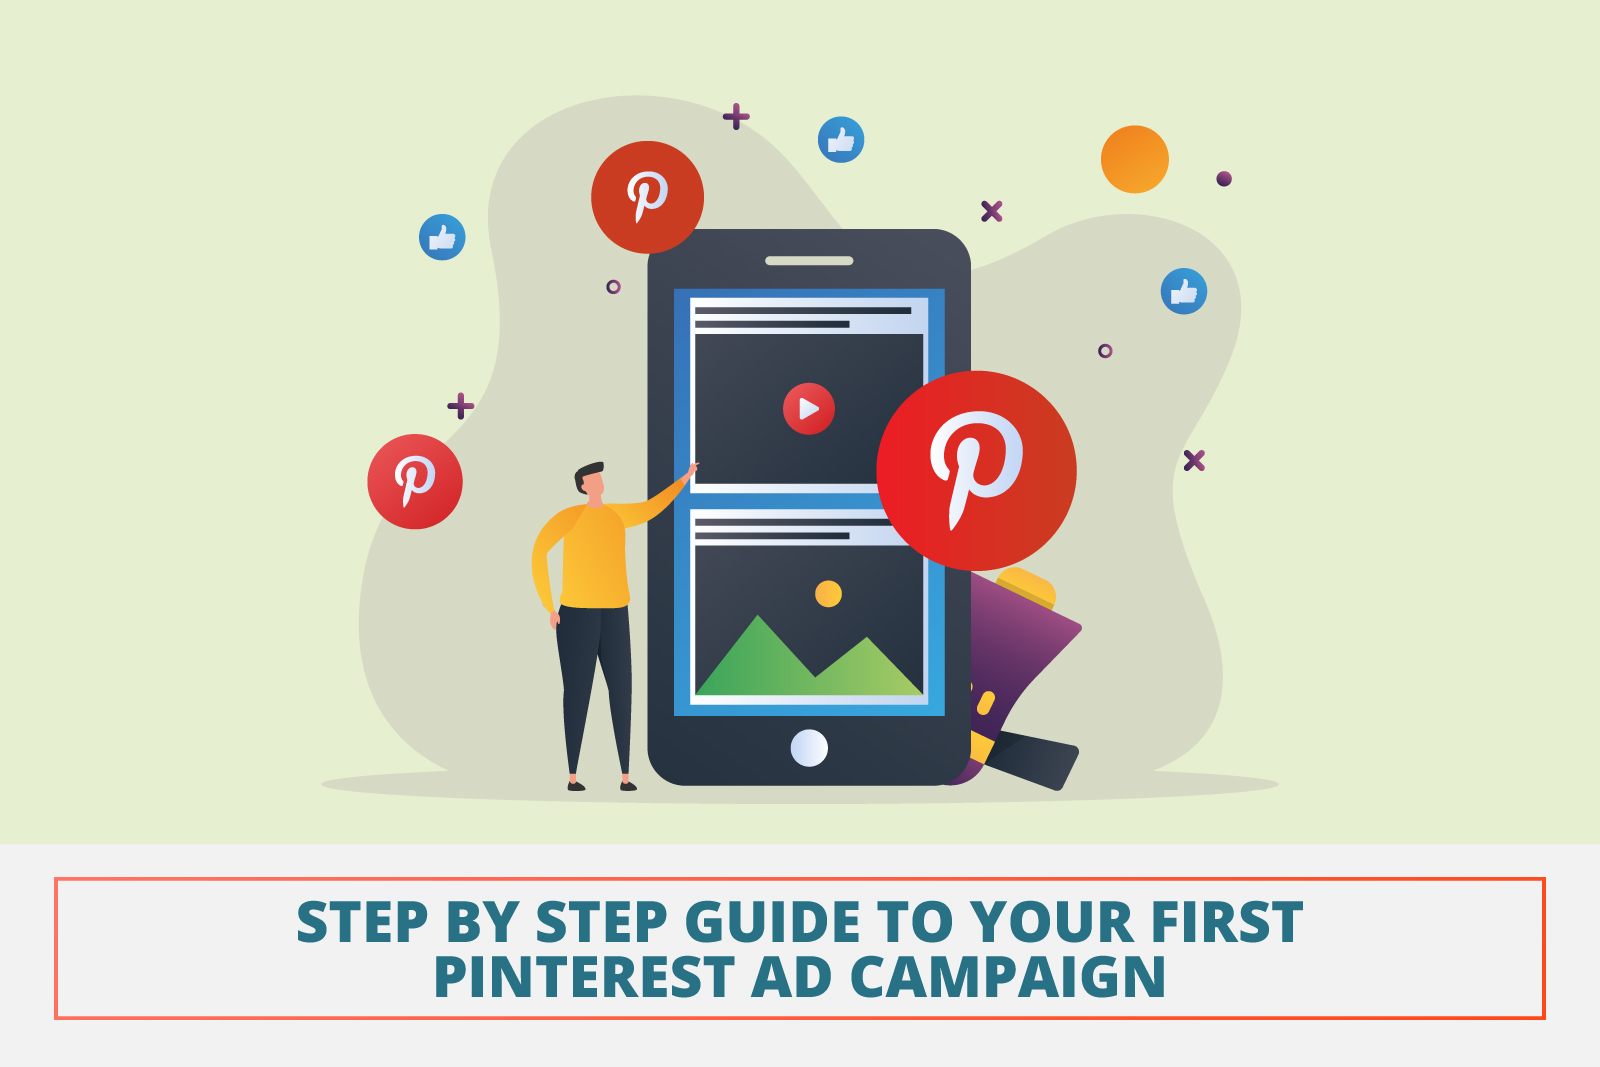 Step by step guide to your first Pinterest ad campaign